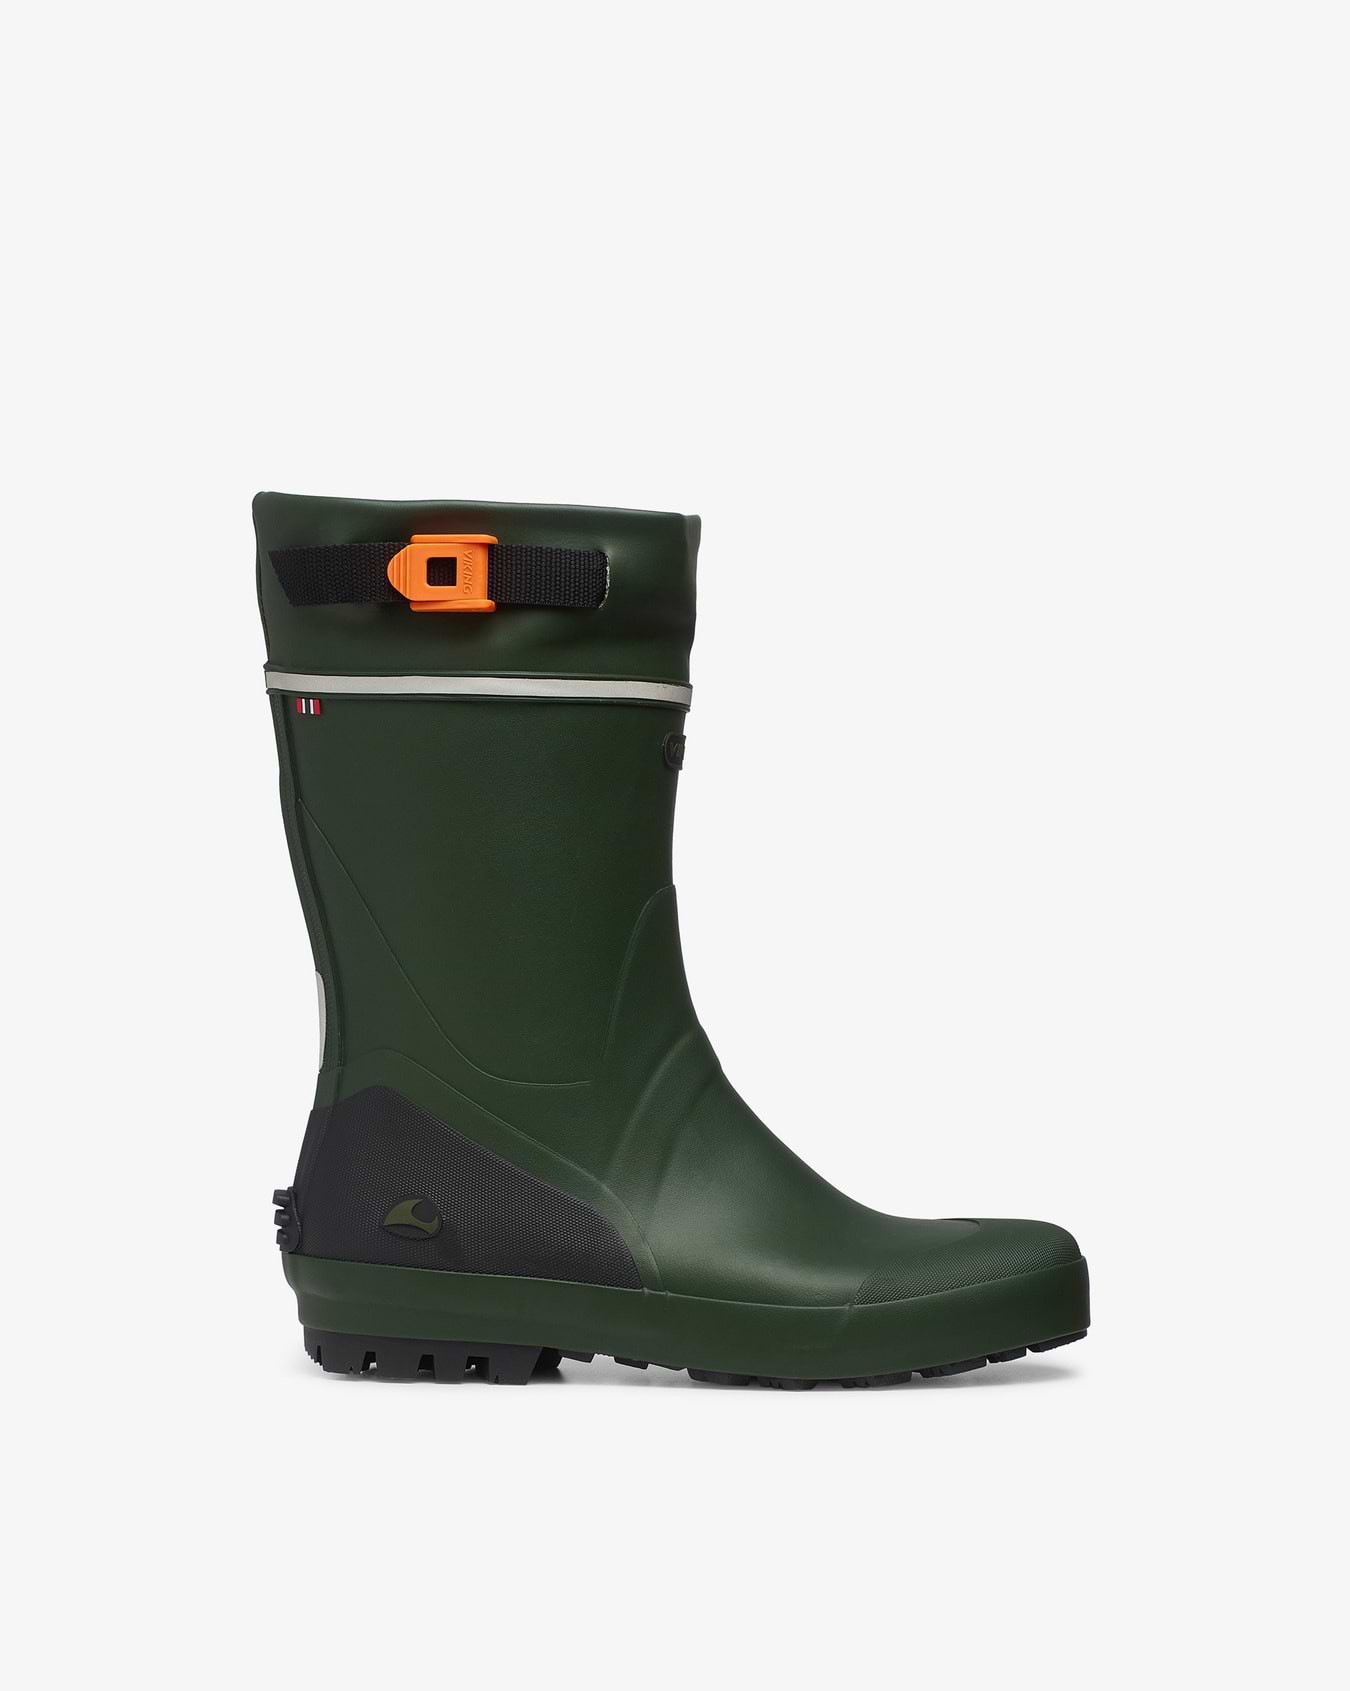 Touring 3 Green Rubber Boot